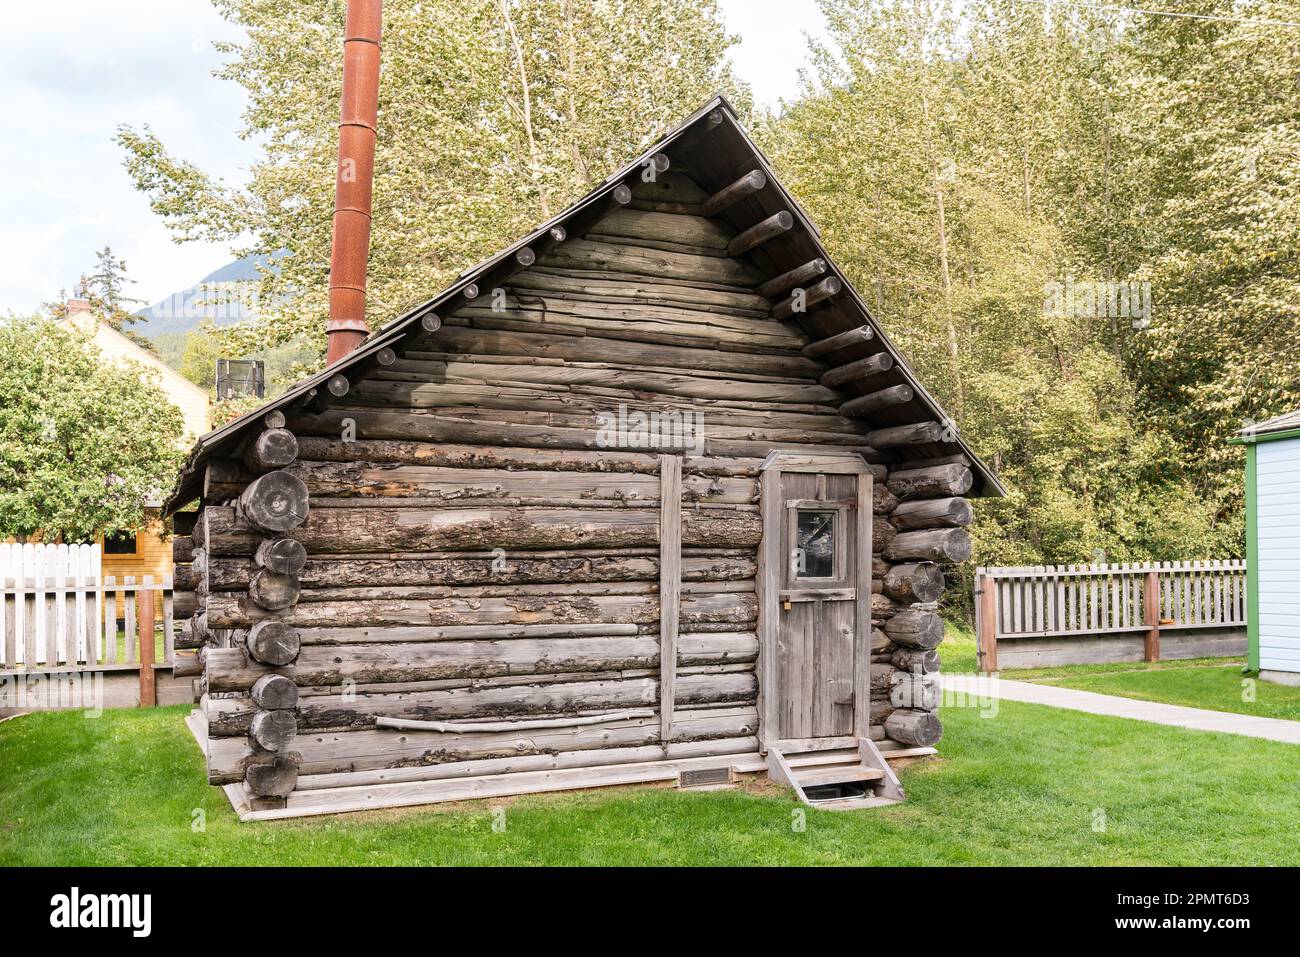 Skagway, AK - September 7, 2022: Exterior of the historic Moore Homestead cabin built by Captain William Moore in 1887 Stock Photo